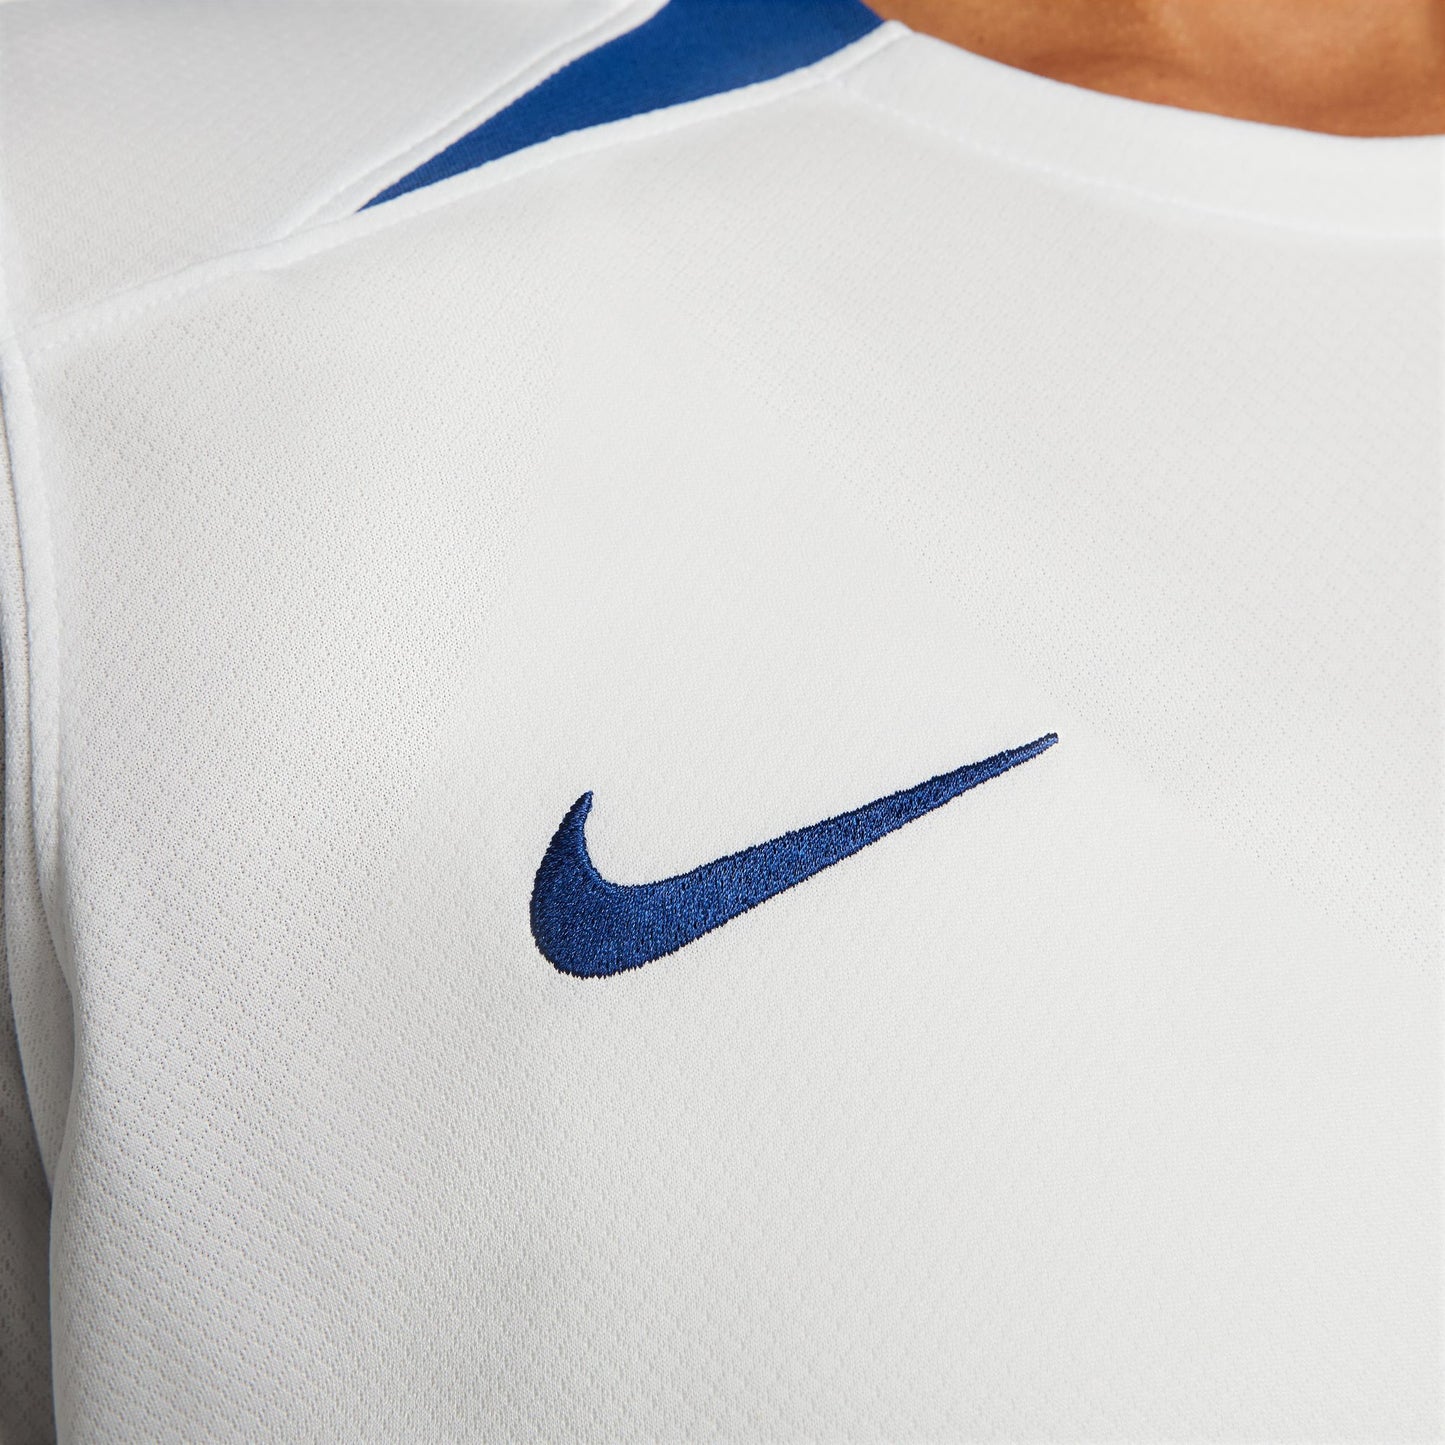 England Lionesses 2023 Home Curved Fit Nike Stadium Shirt